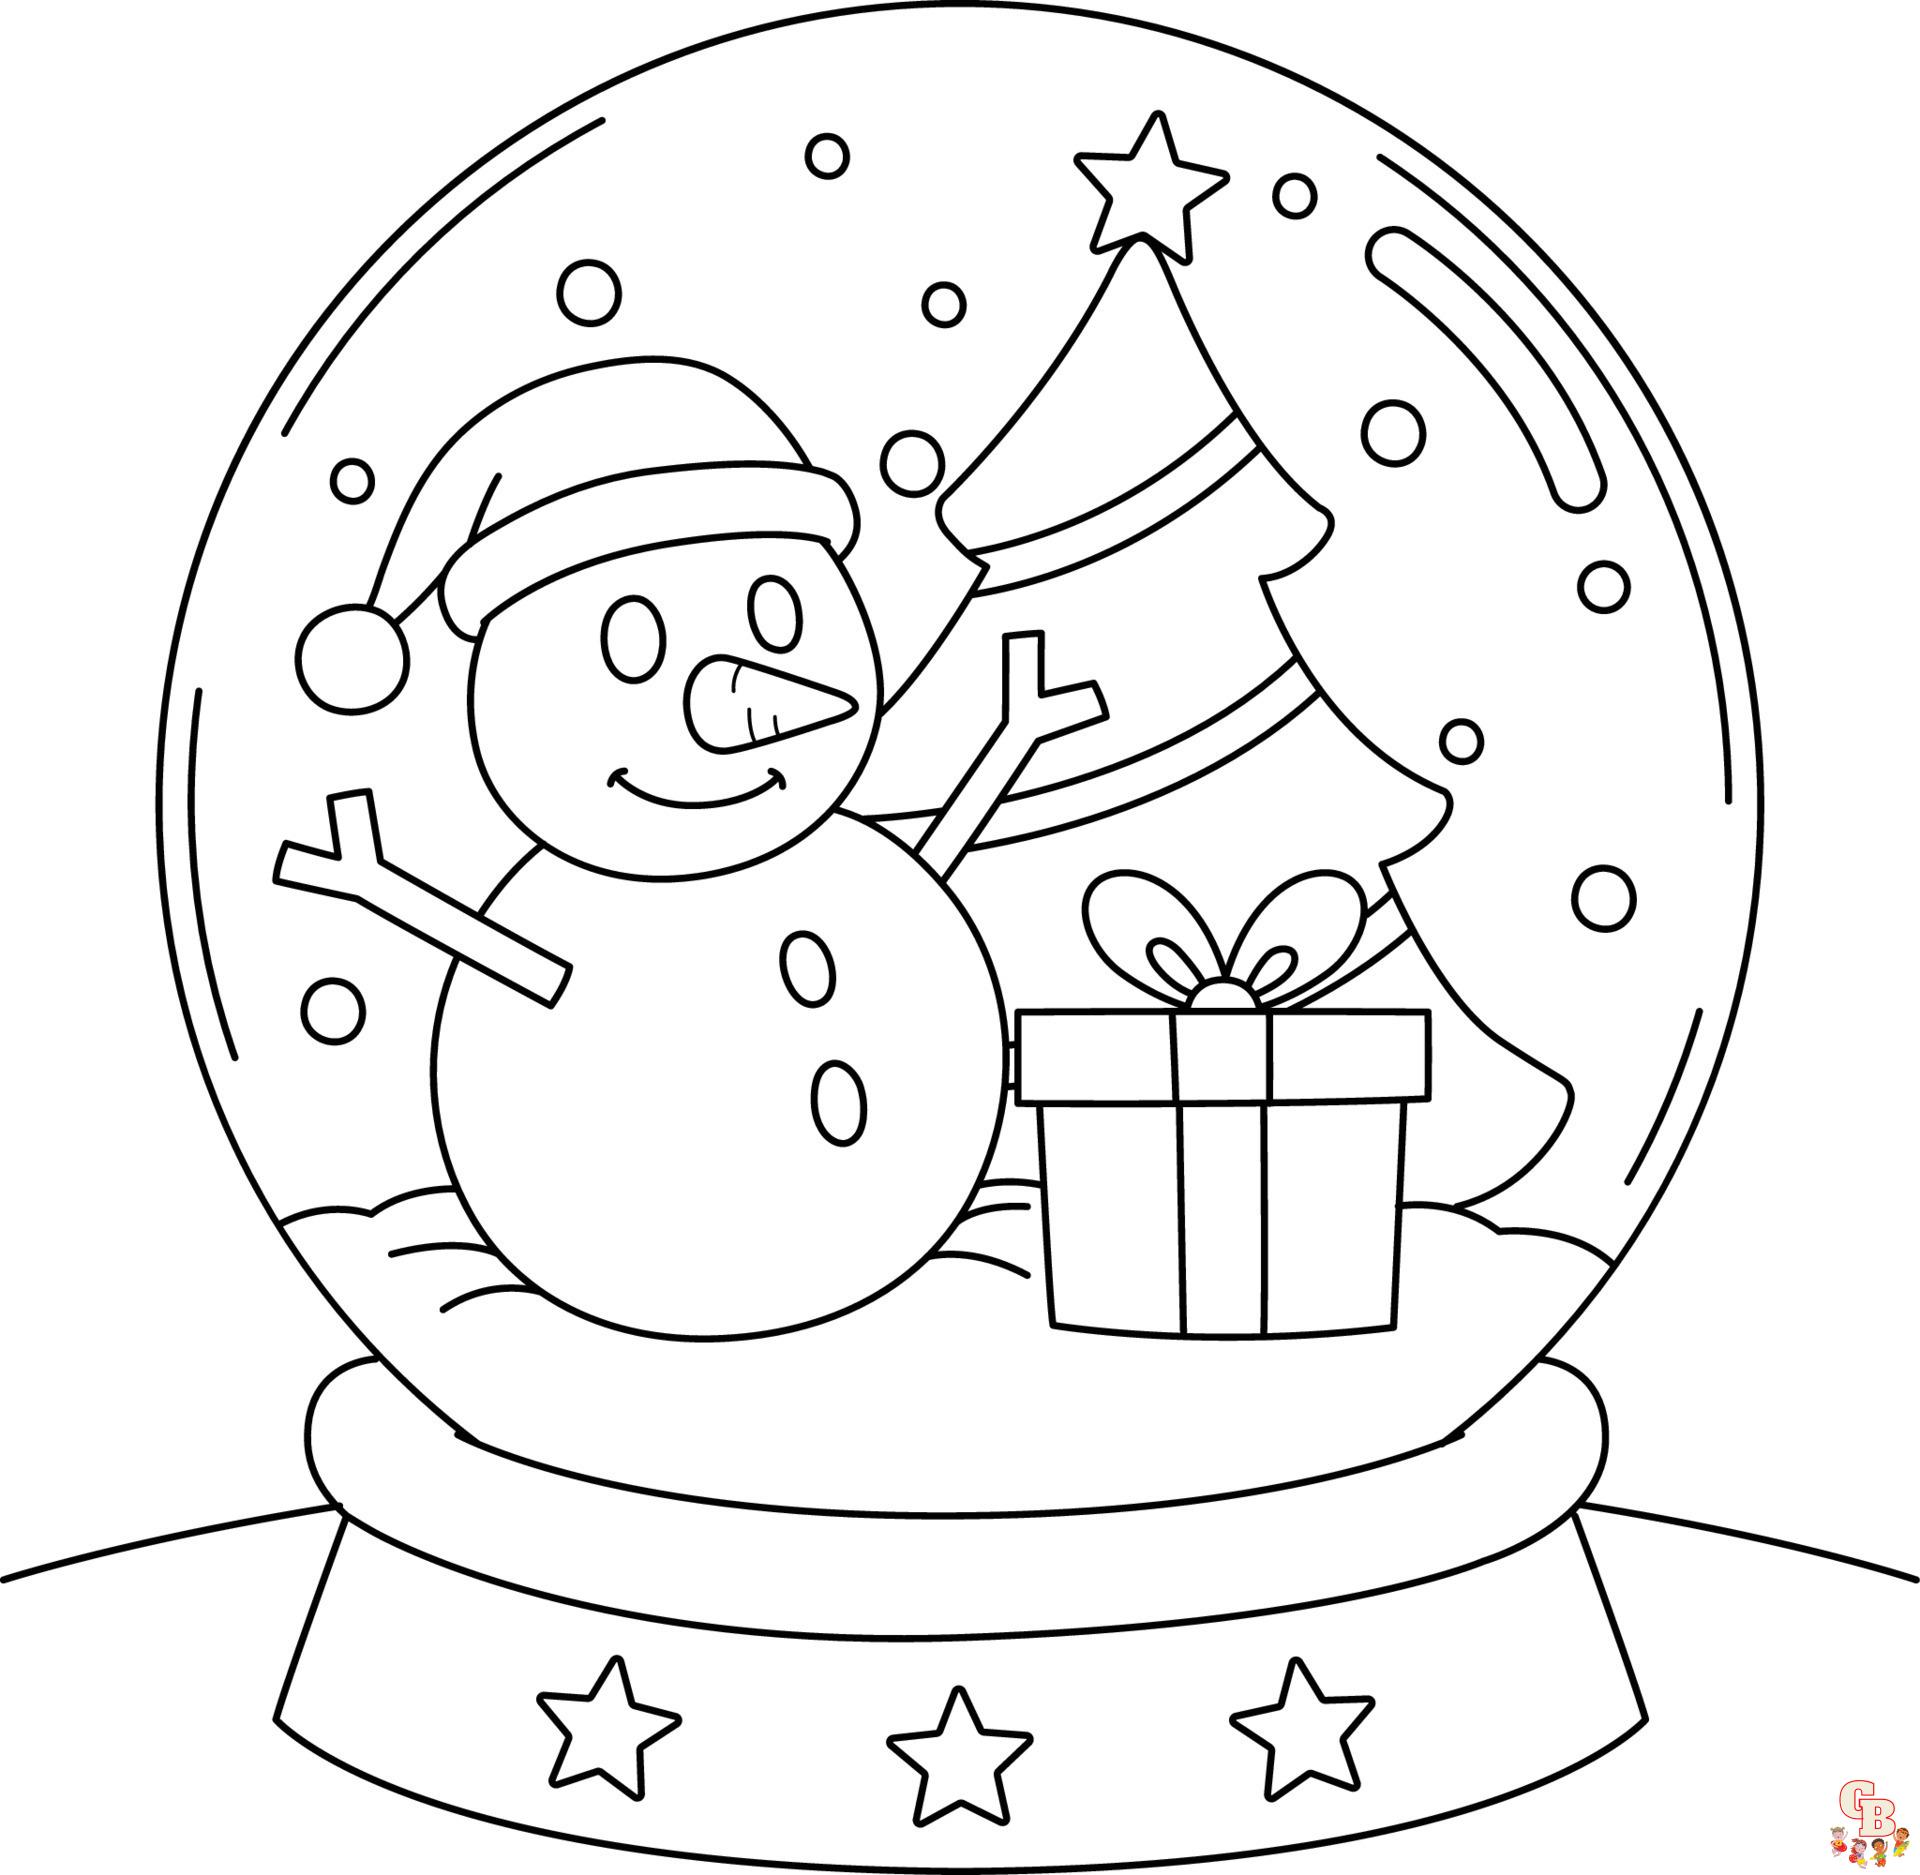 Snowglobe Coloring Pages